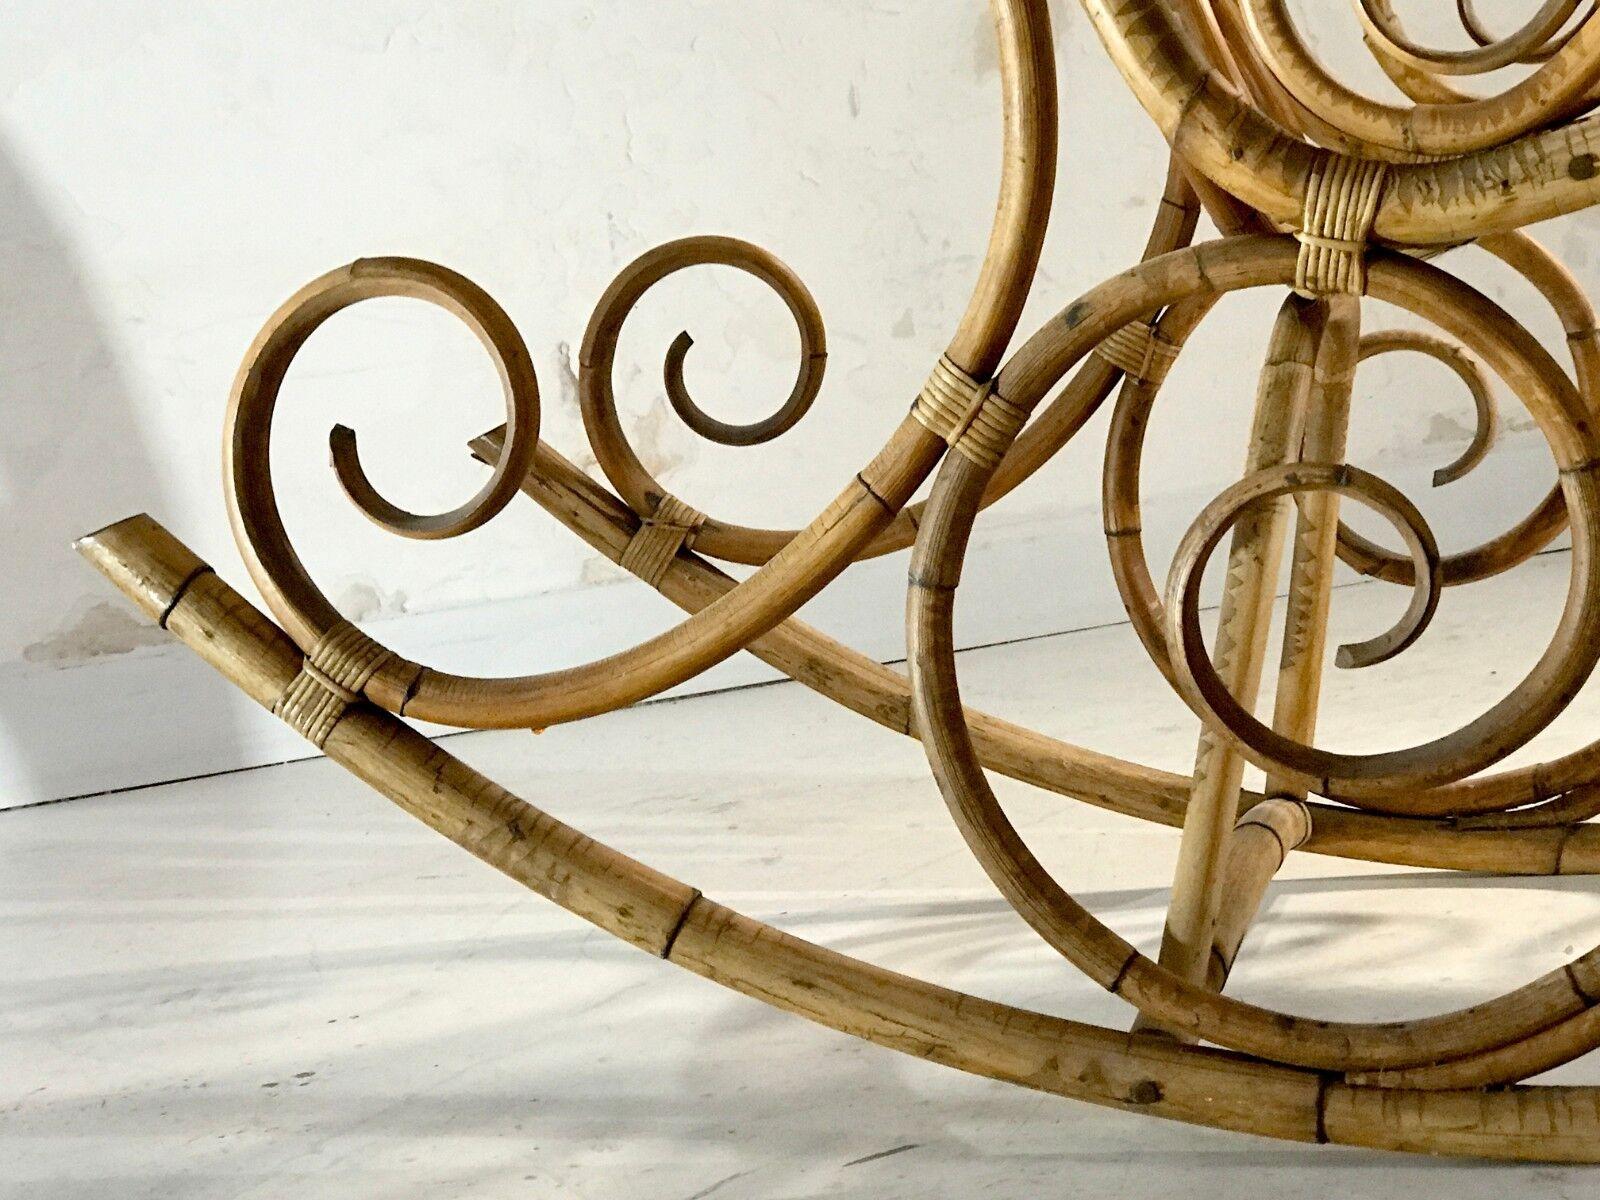 An Early MODERN NEO-CLASSICAL FREE-FORM ROCKING-CHAIR by THONET, France 1900 For Sale 4